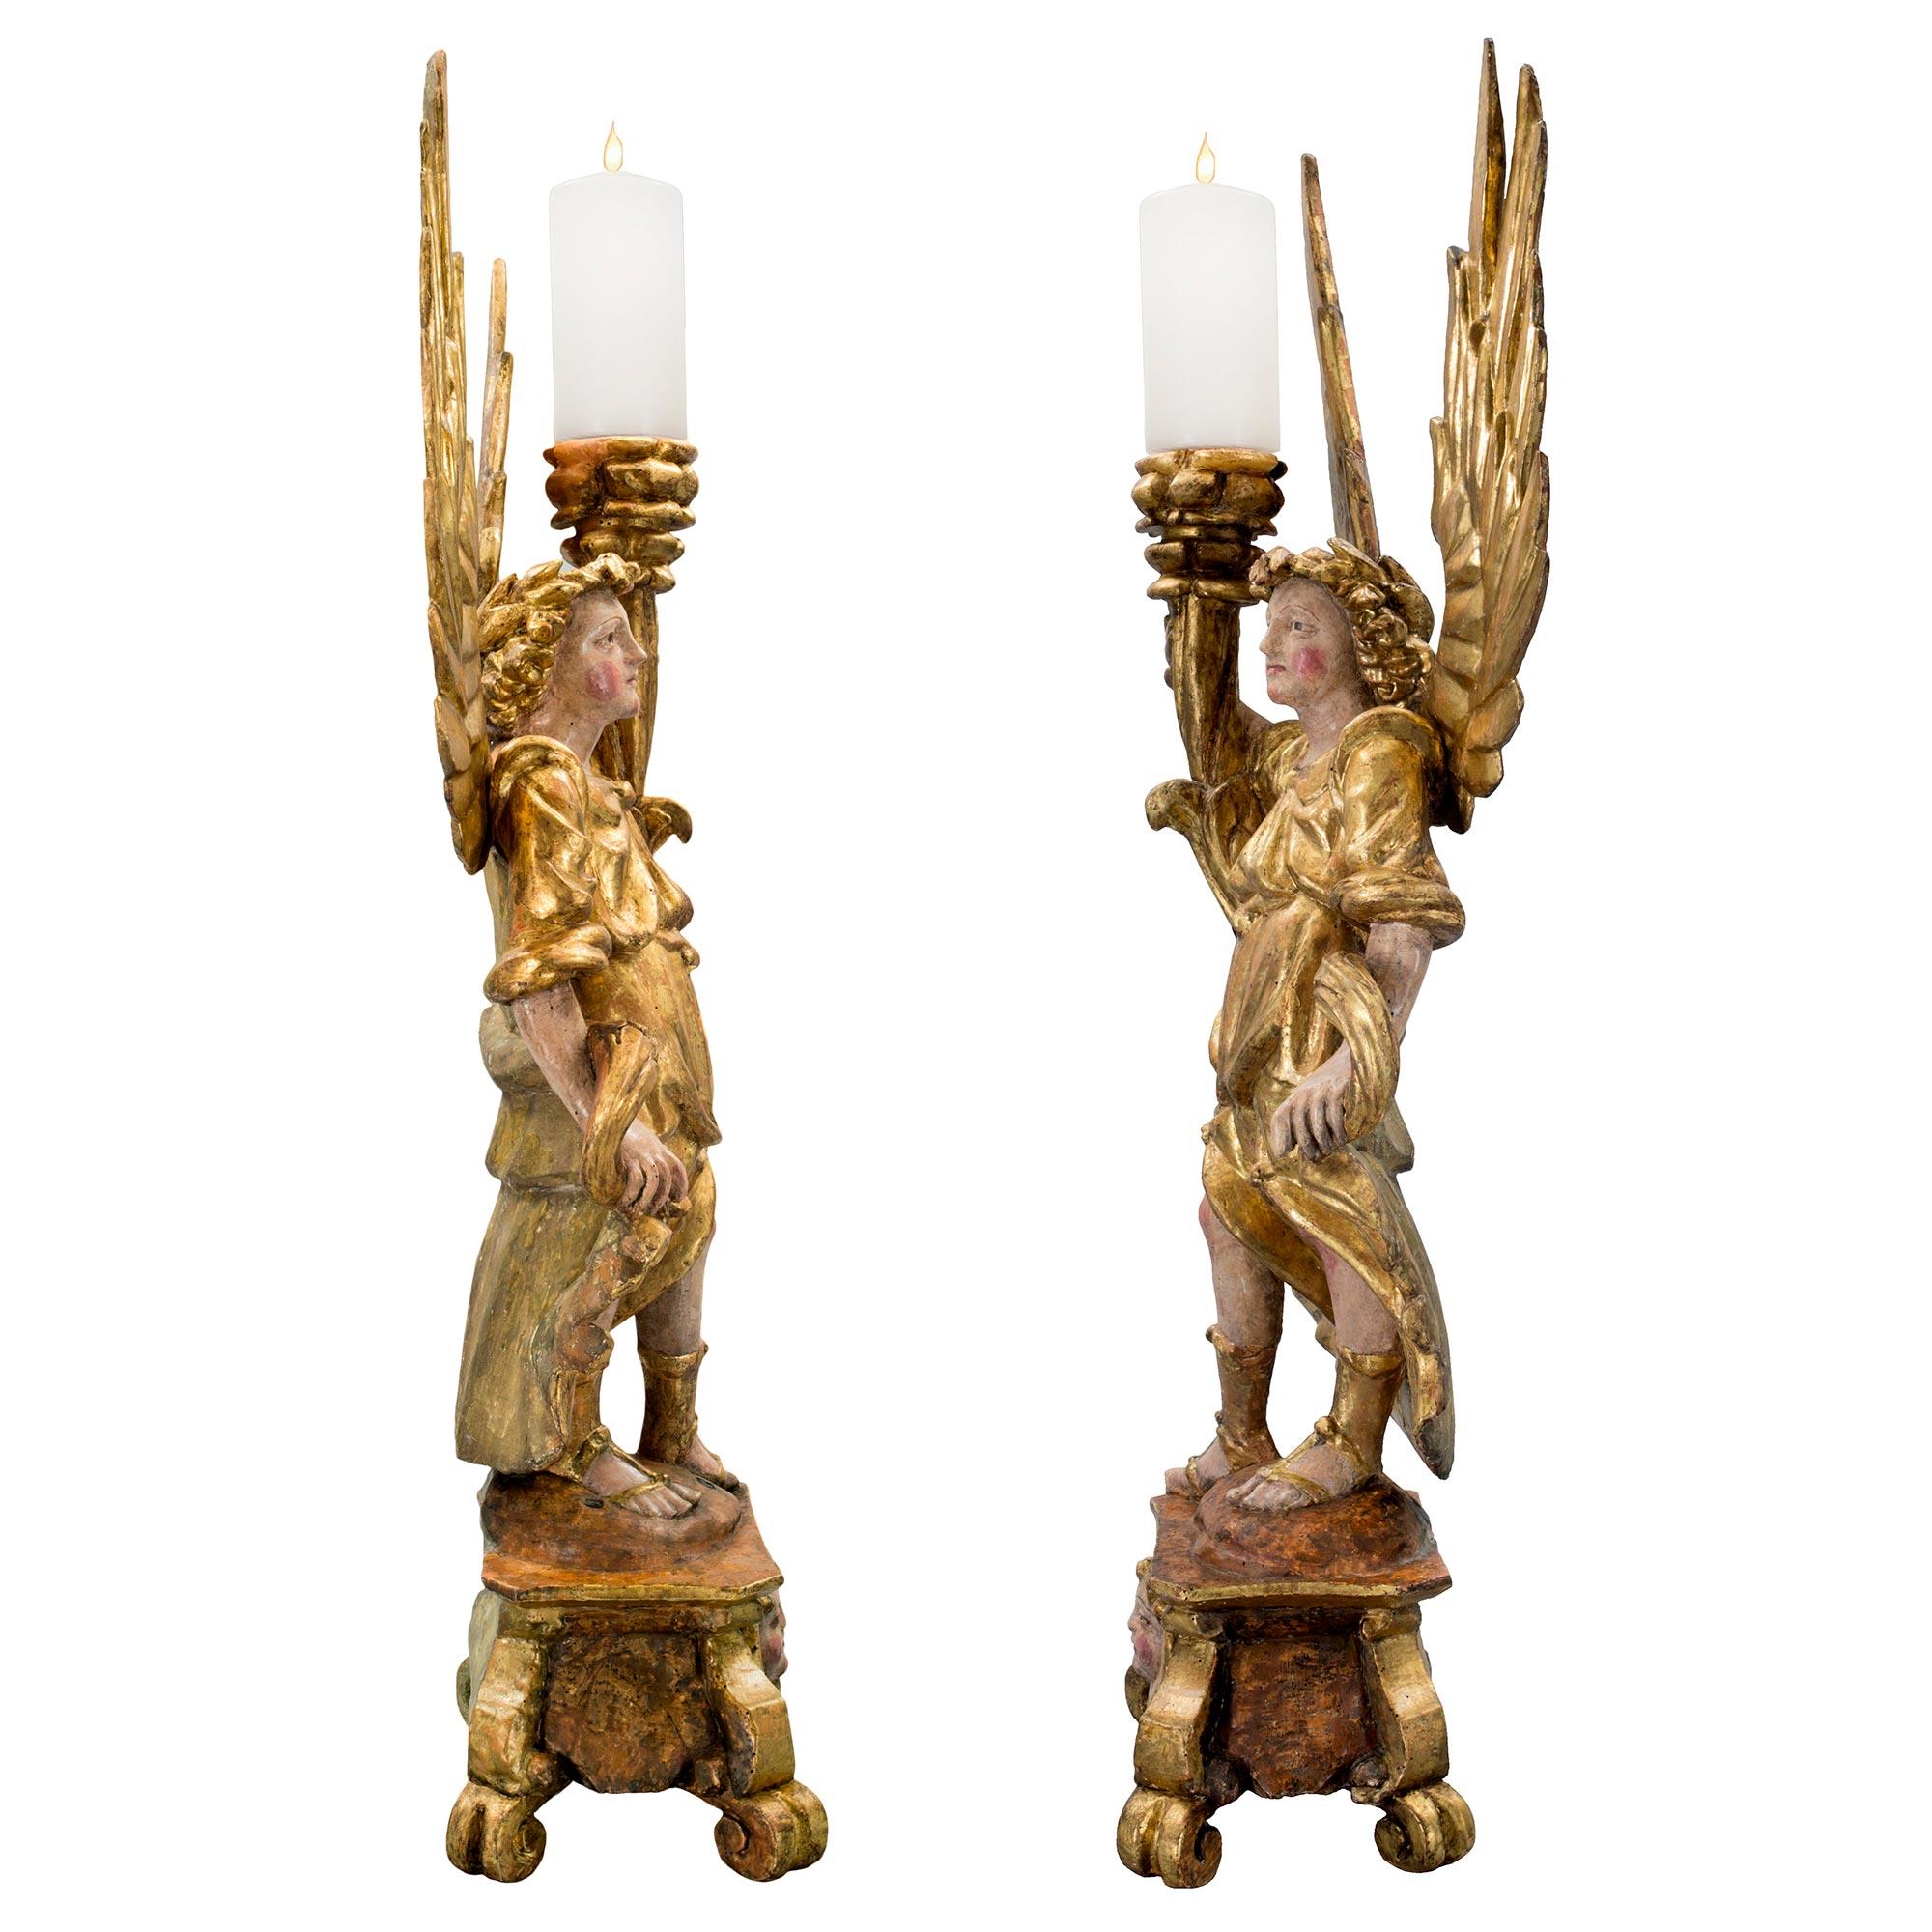 A pair of exuberant Italian 17th century candleholders from northern Italy, circa 1670. Each polychrome and giltwood candle holder is raised on scrolled feet below a uniquely shaped pedestal with winged cherub masks. Above are wonderful winged